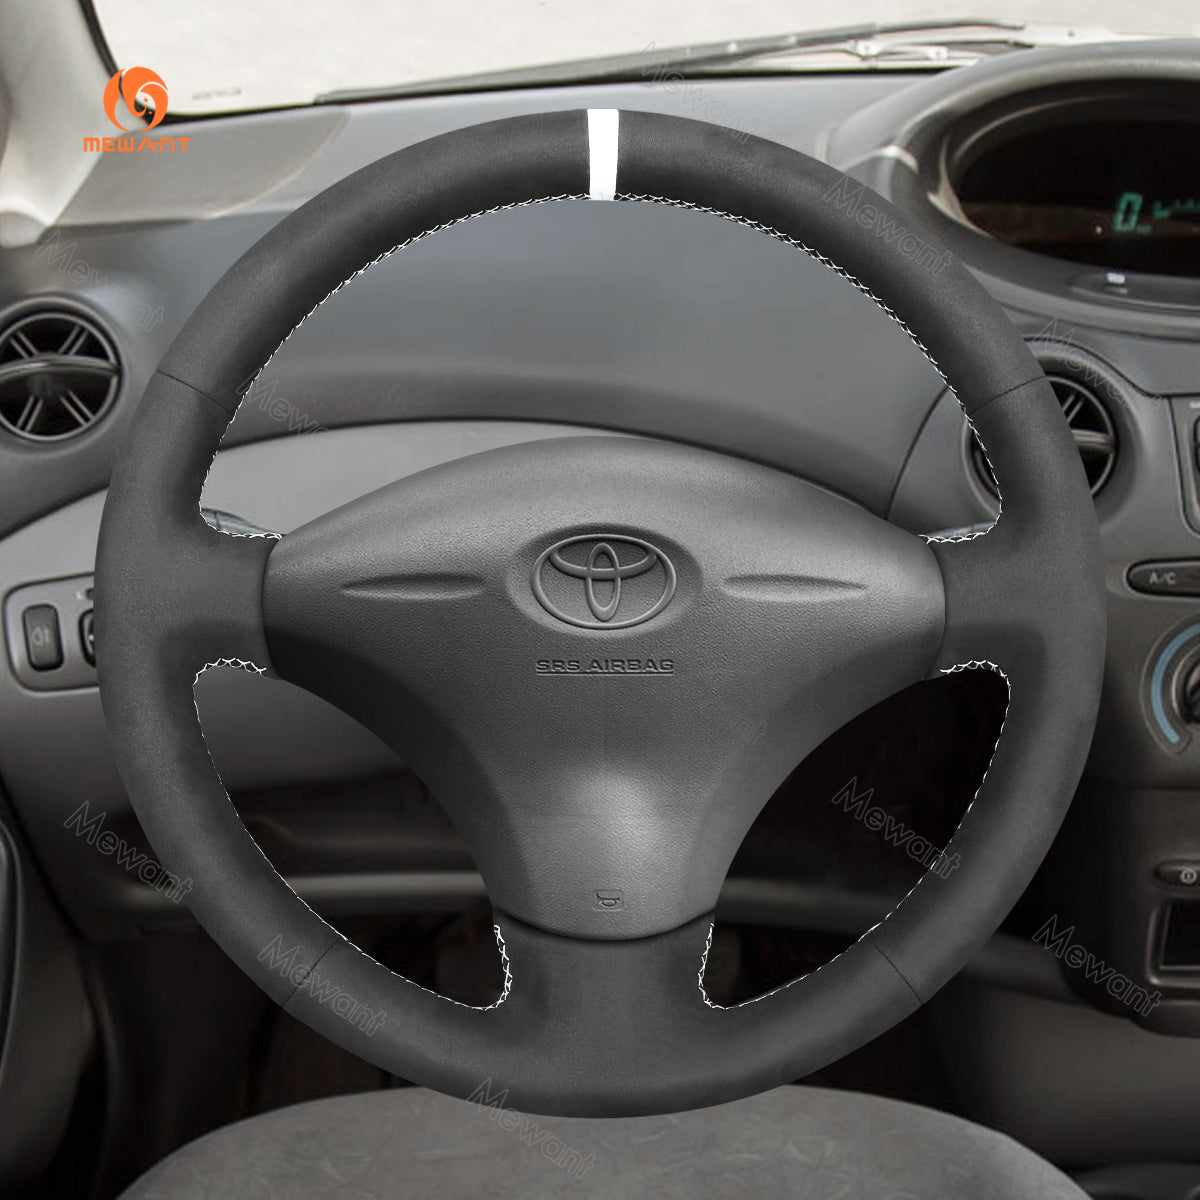 MEWANT Hand Stitch Car Steering Wheel Cover for Toyota Yaris GR